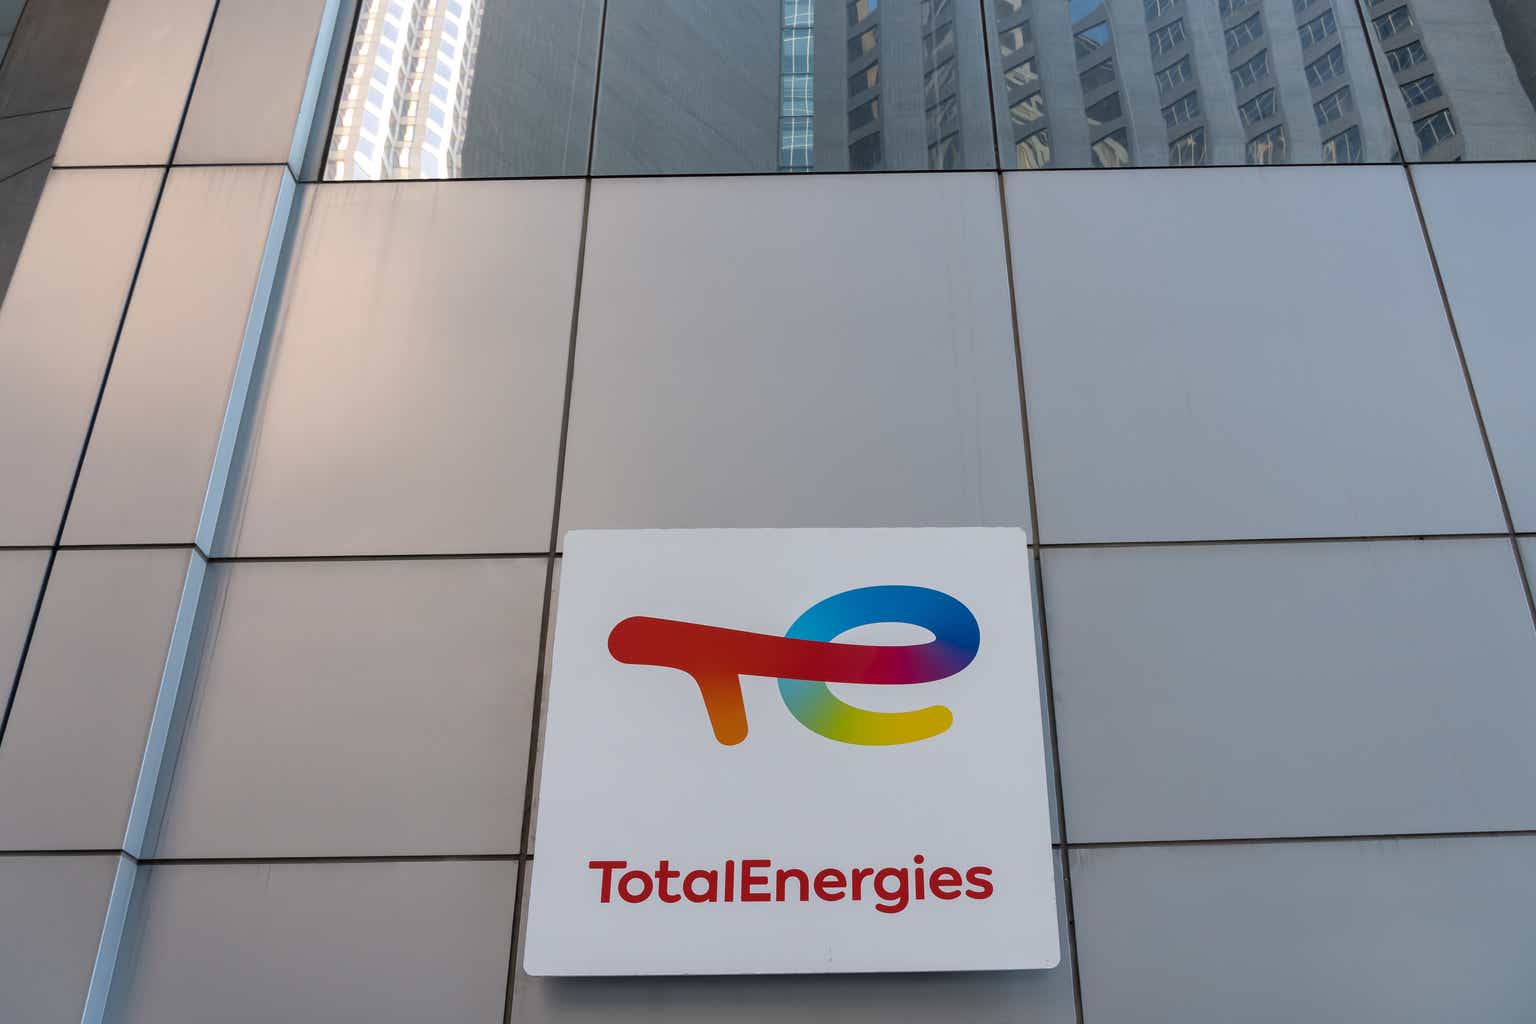 TotalEnergies: Stable Alternative Regardless of The Chance Of Painful Q3 (NYSE:TTE)